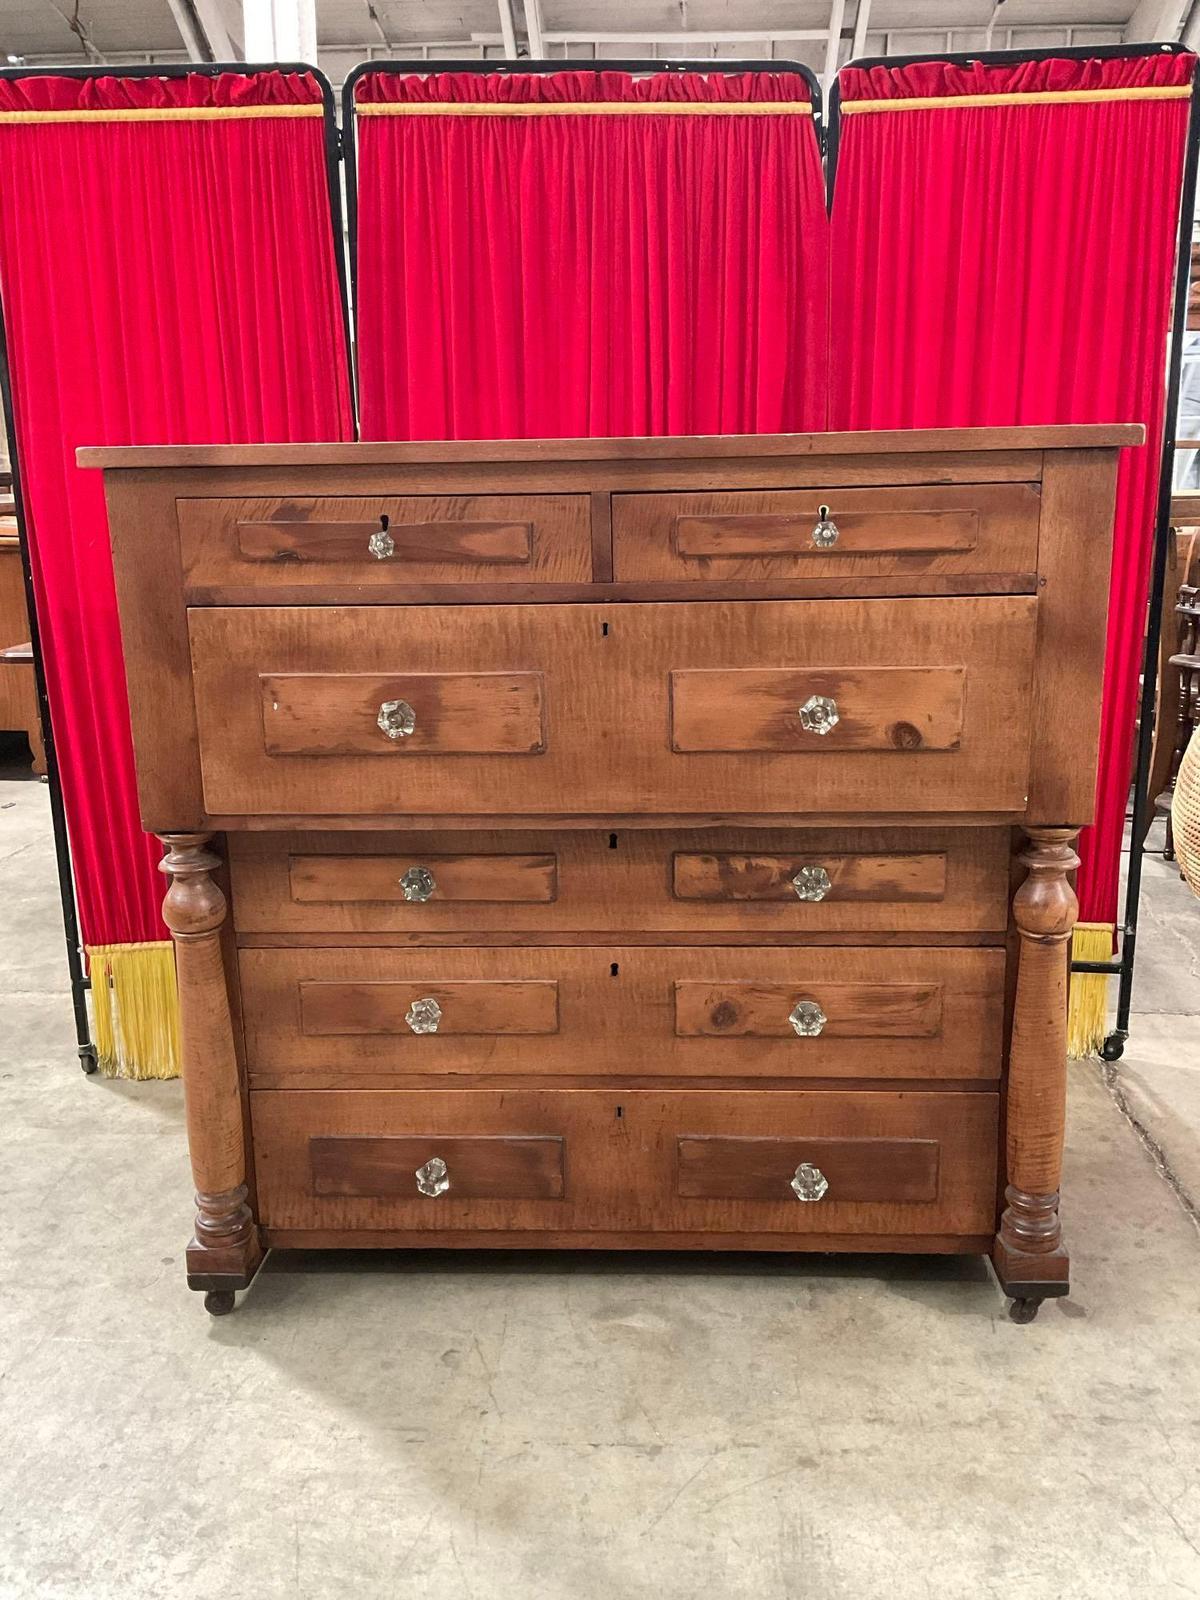 Antique Wooden Wheeled Empire Dresser w/ 6 Drawers, Glass Knobs & Beautiful Grain. See pics.